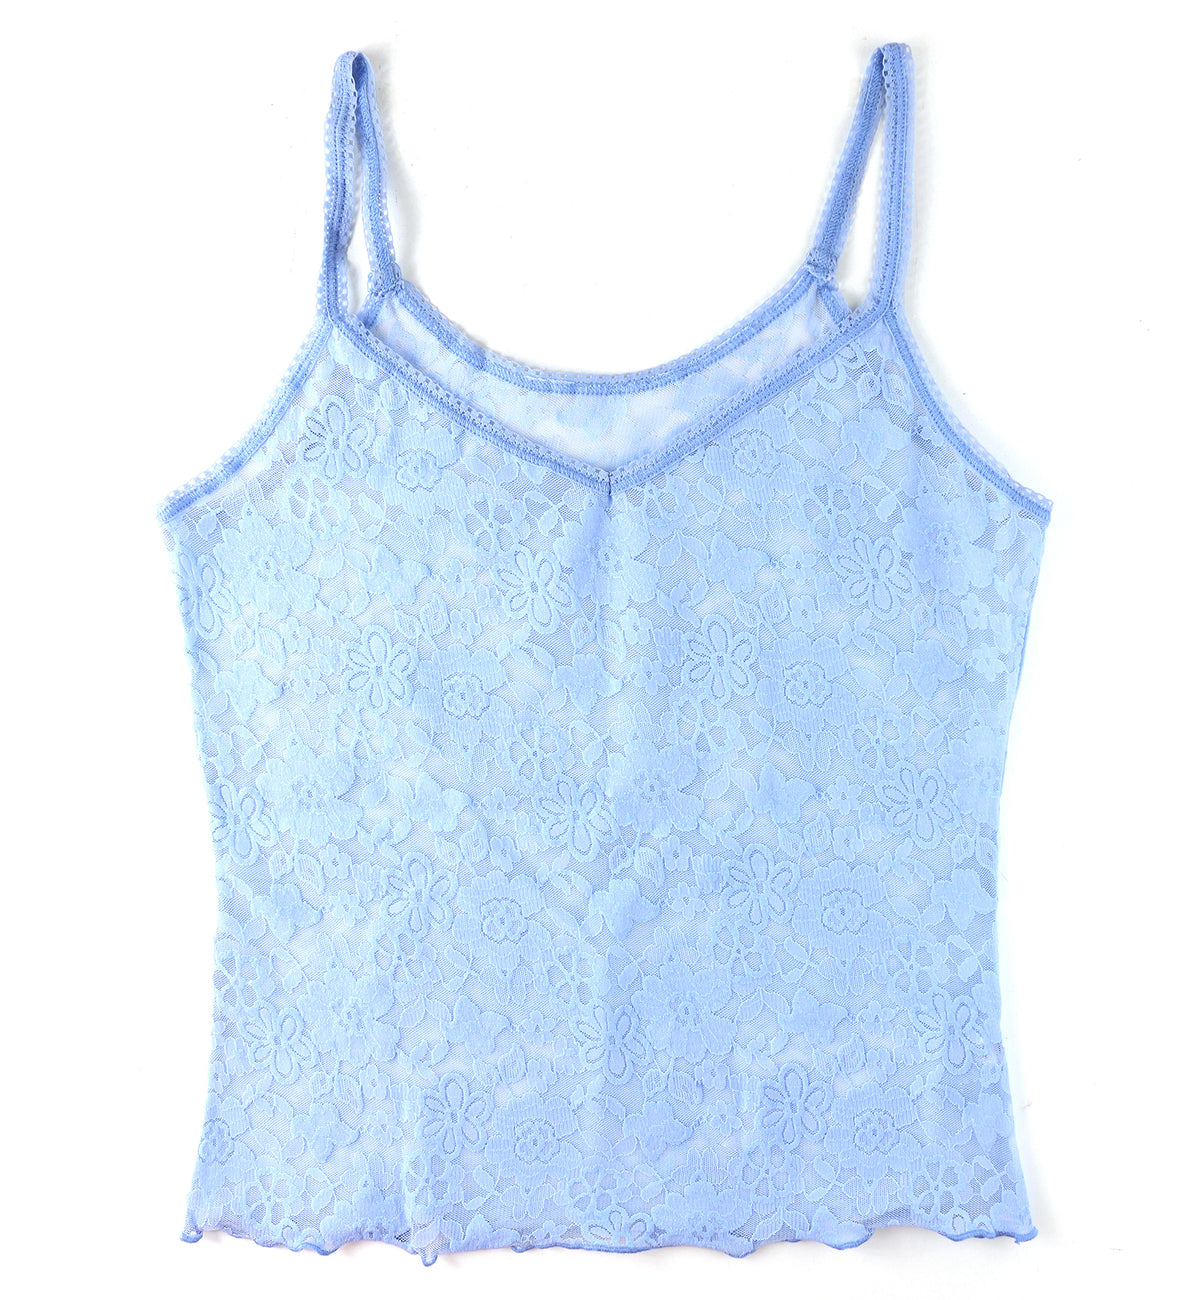 Hanky Panky Daily Lace Camisole (774731P),XS,Fresh Air - Fresh Air,XS